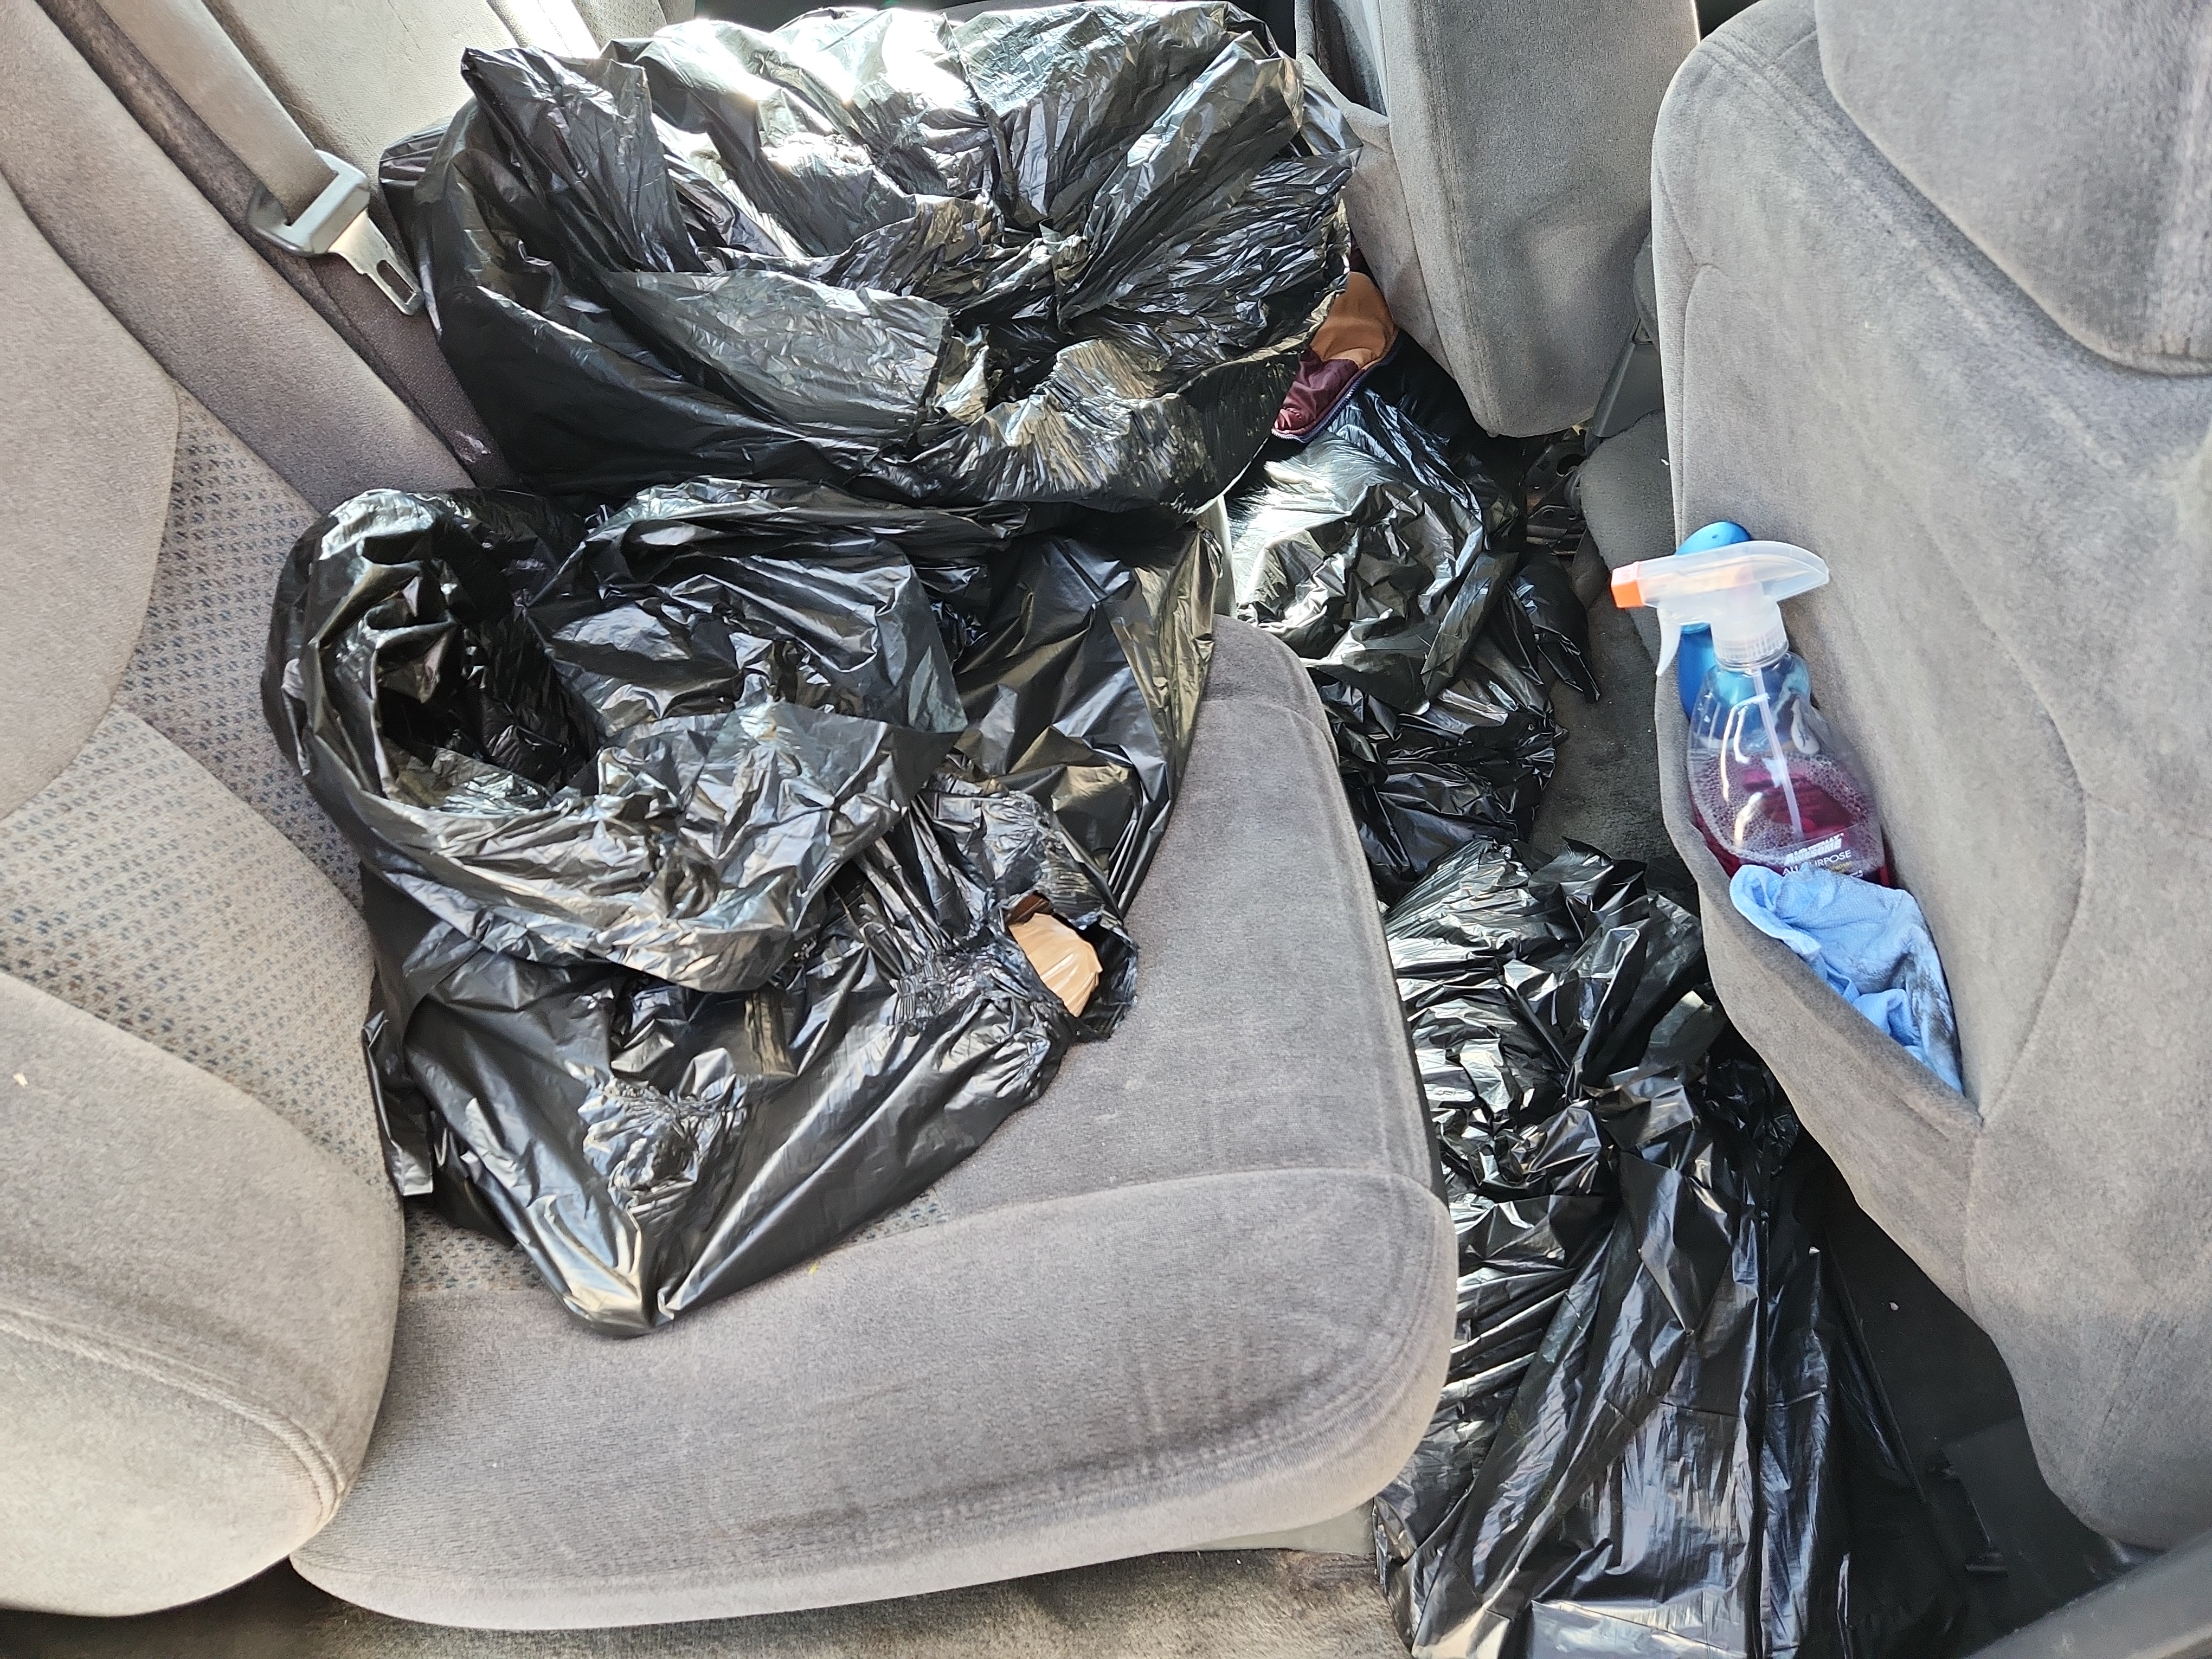 Black plastic bags in the back seat of a vehicle